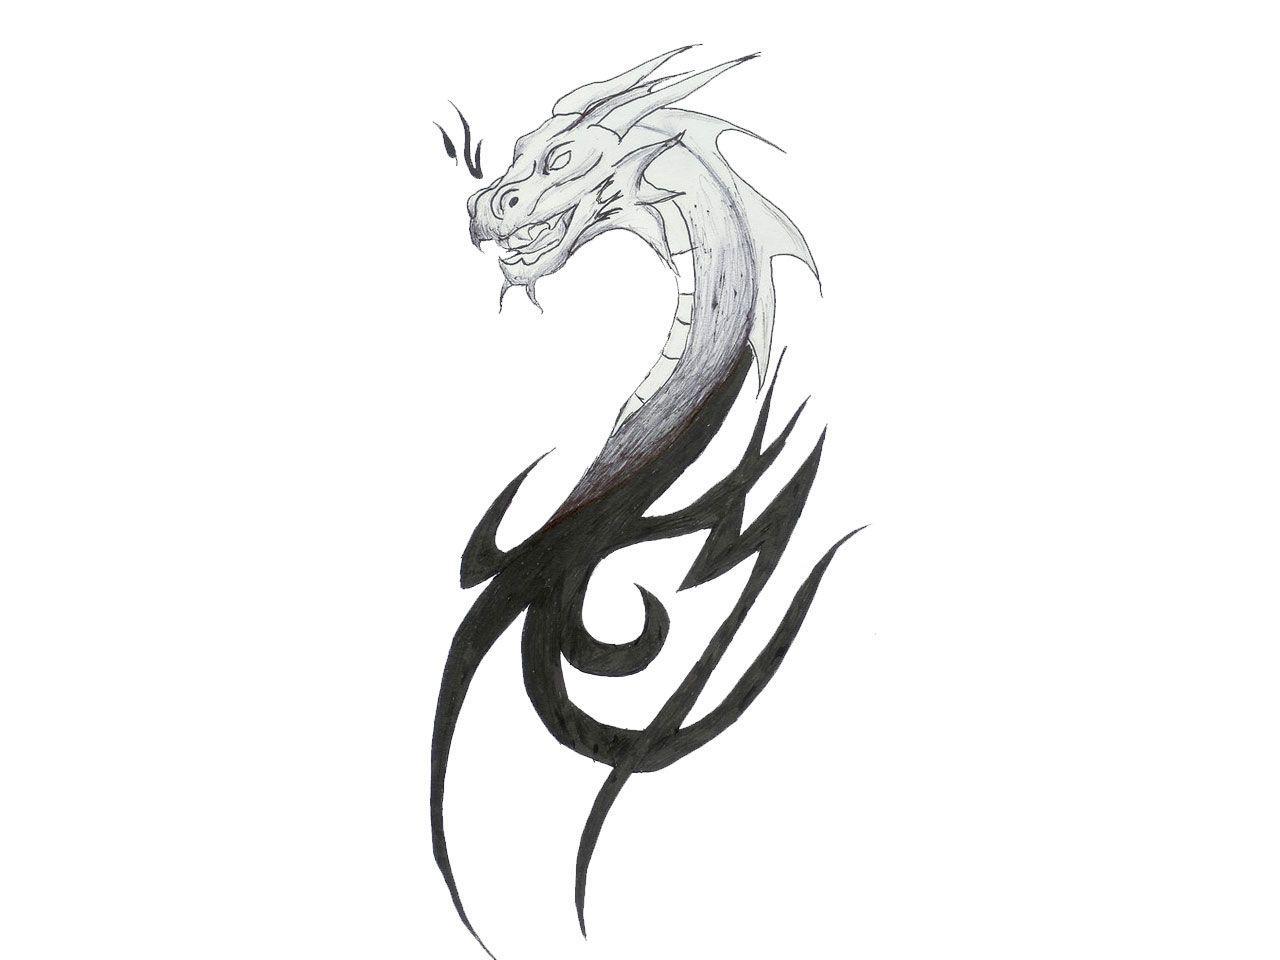 Free designs sketch of dragon head and neck wallpaper